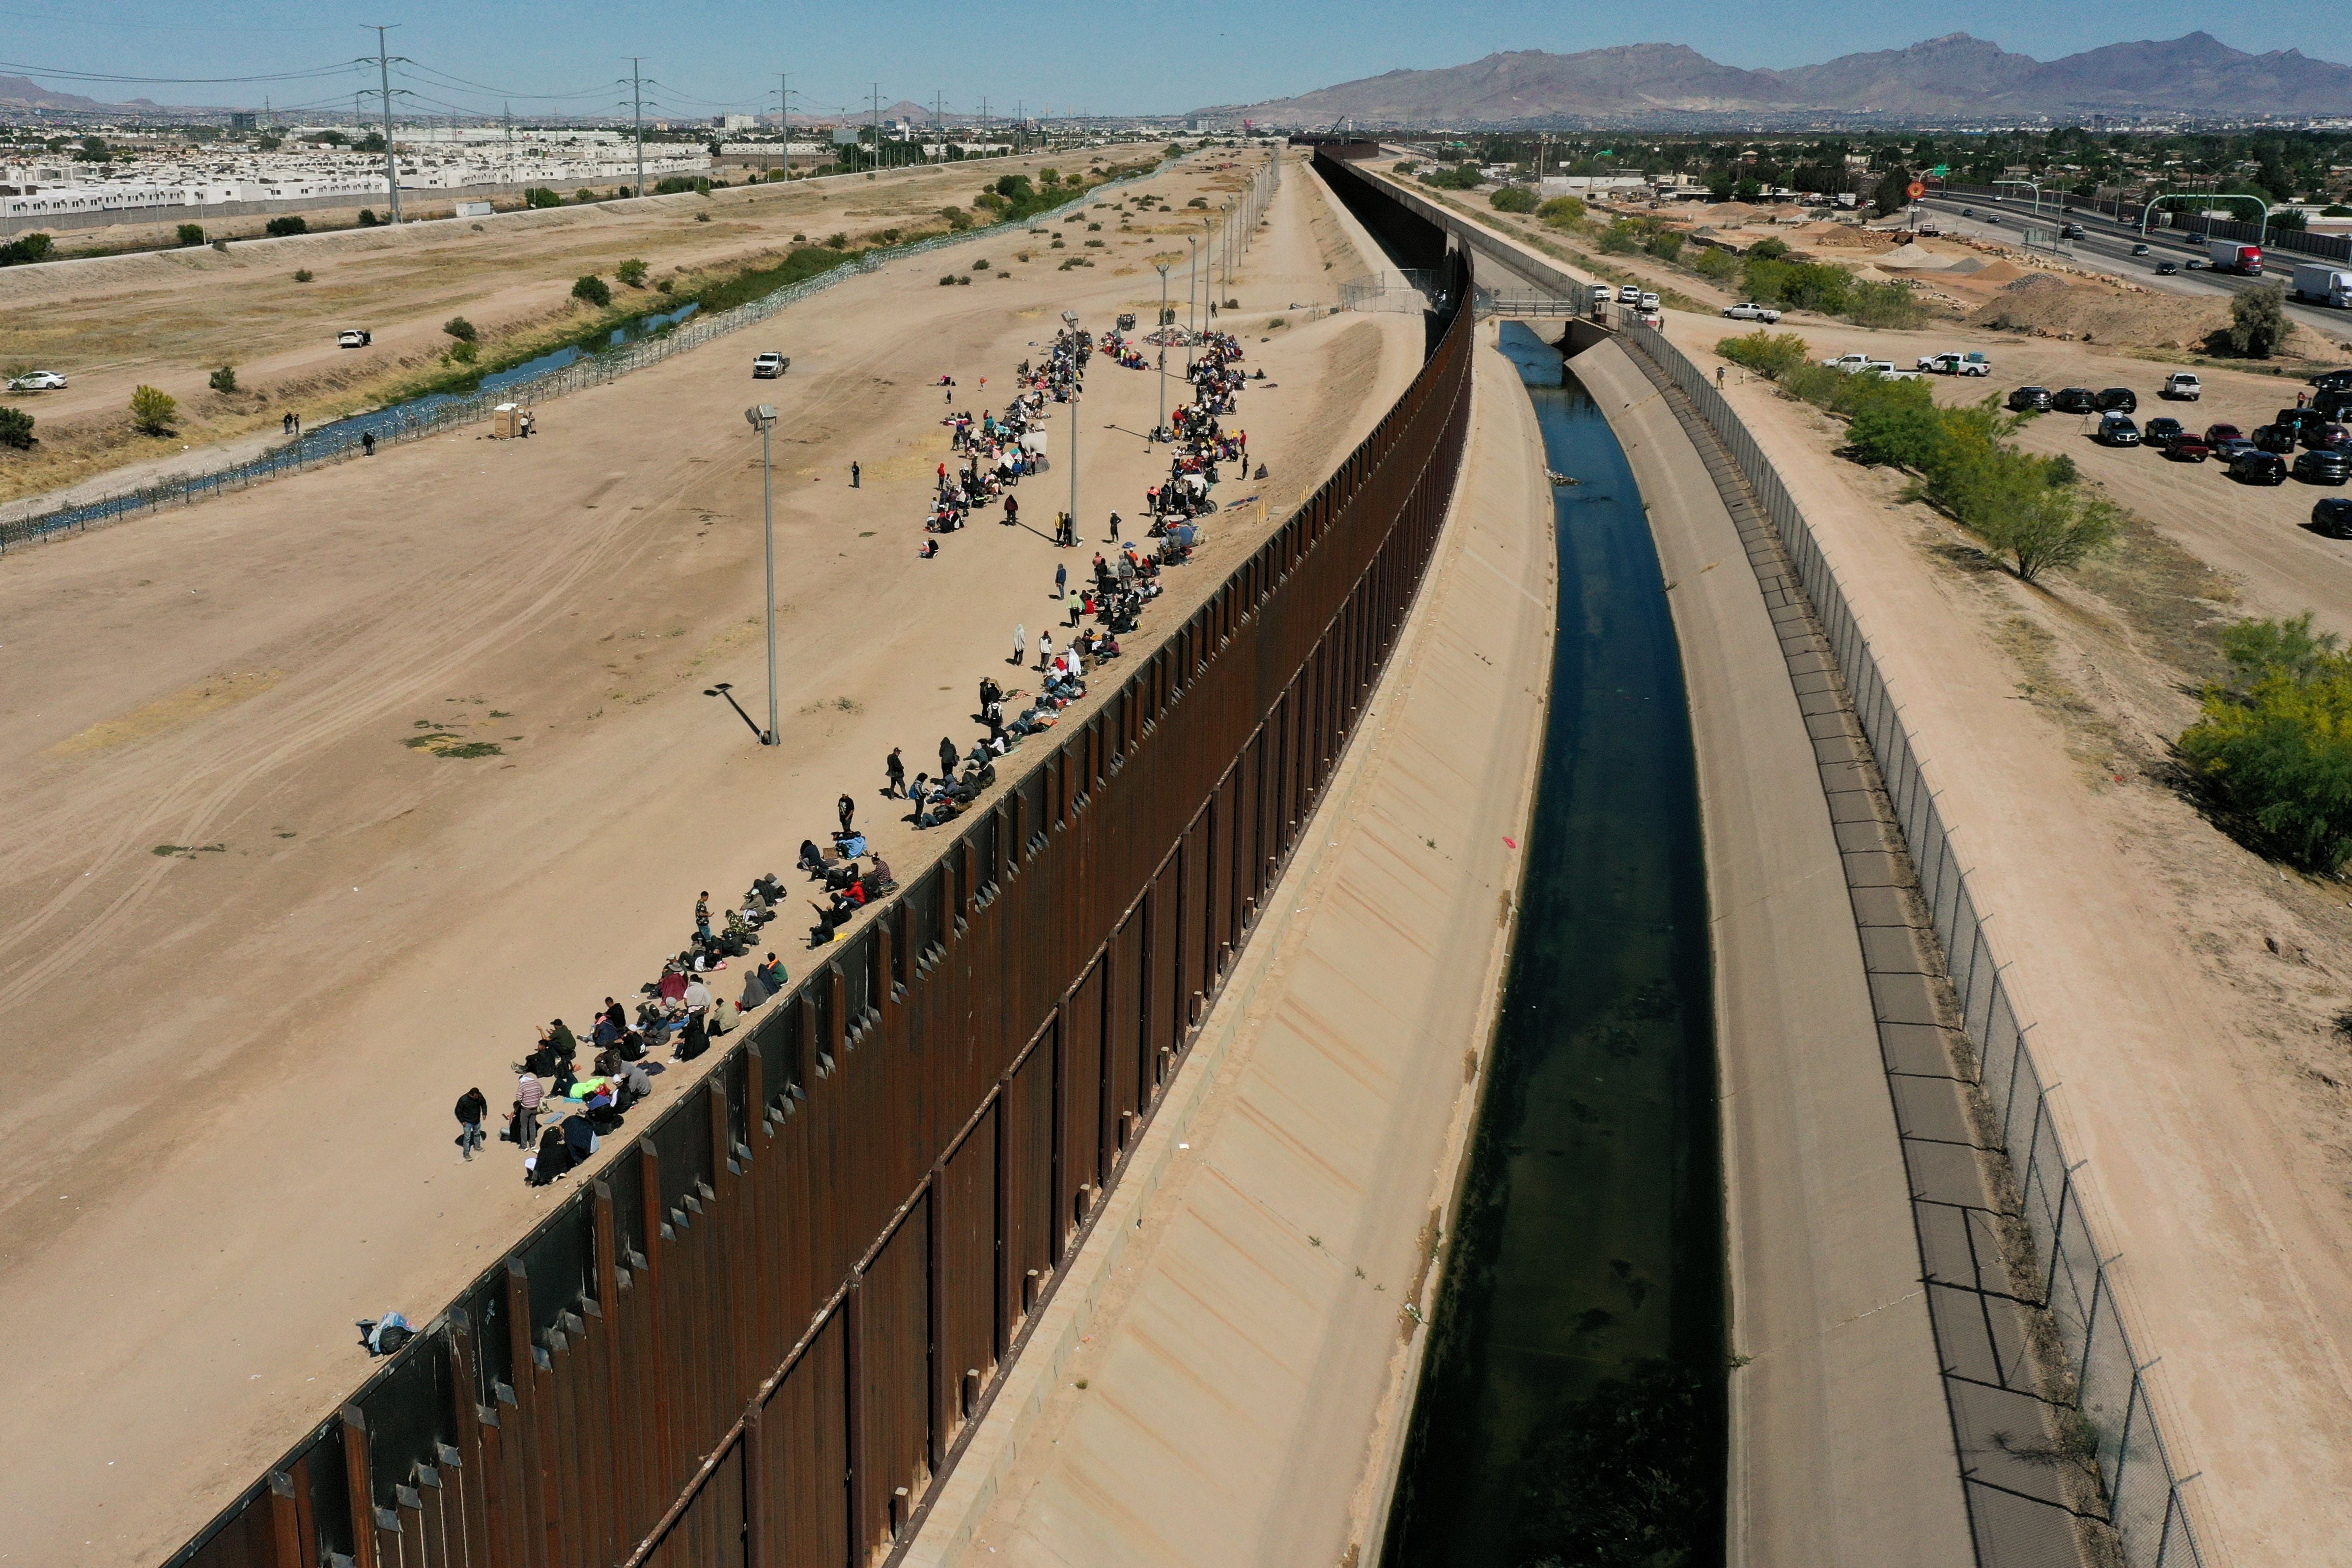 An aerial image shows migrants waiting along the border wall to surrender to US Customs and Border Protection (CBP) Border Patrol agents for immigration and asylum claim processing after crossing the Rio Grande river into the United Staes on the US-Mexico border in El Paso, Texas, on May 10, 2023